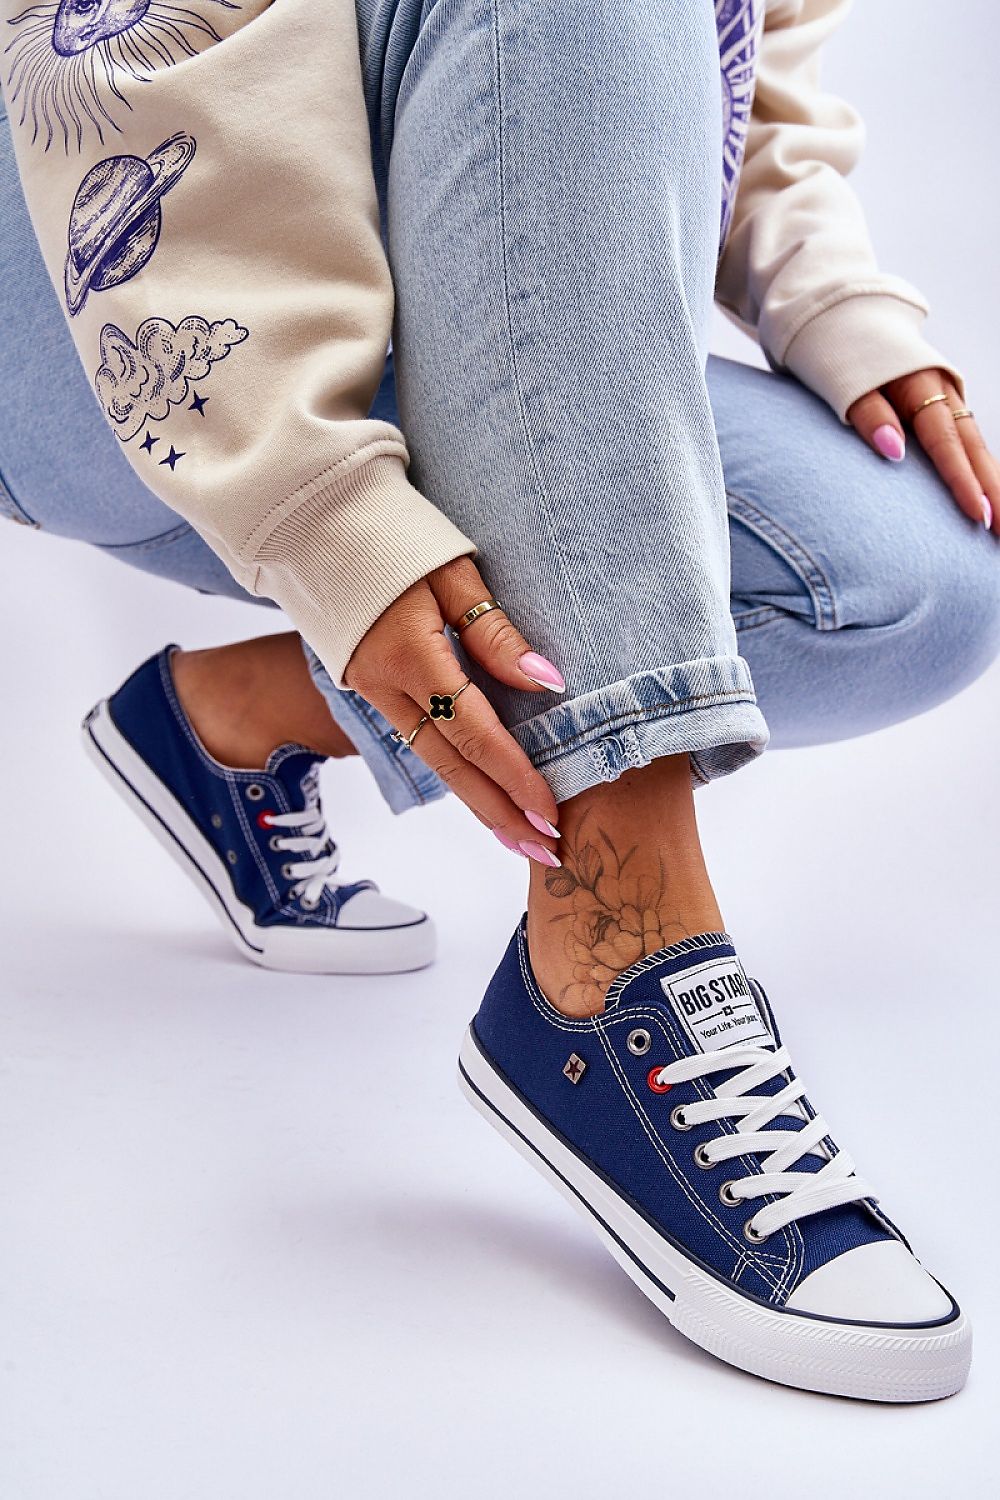 Classic White-Blue Step in style Sneakers